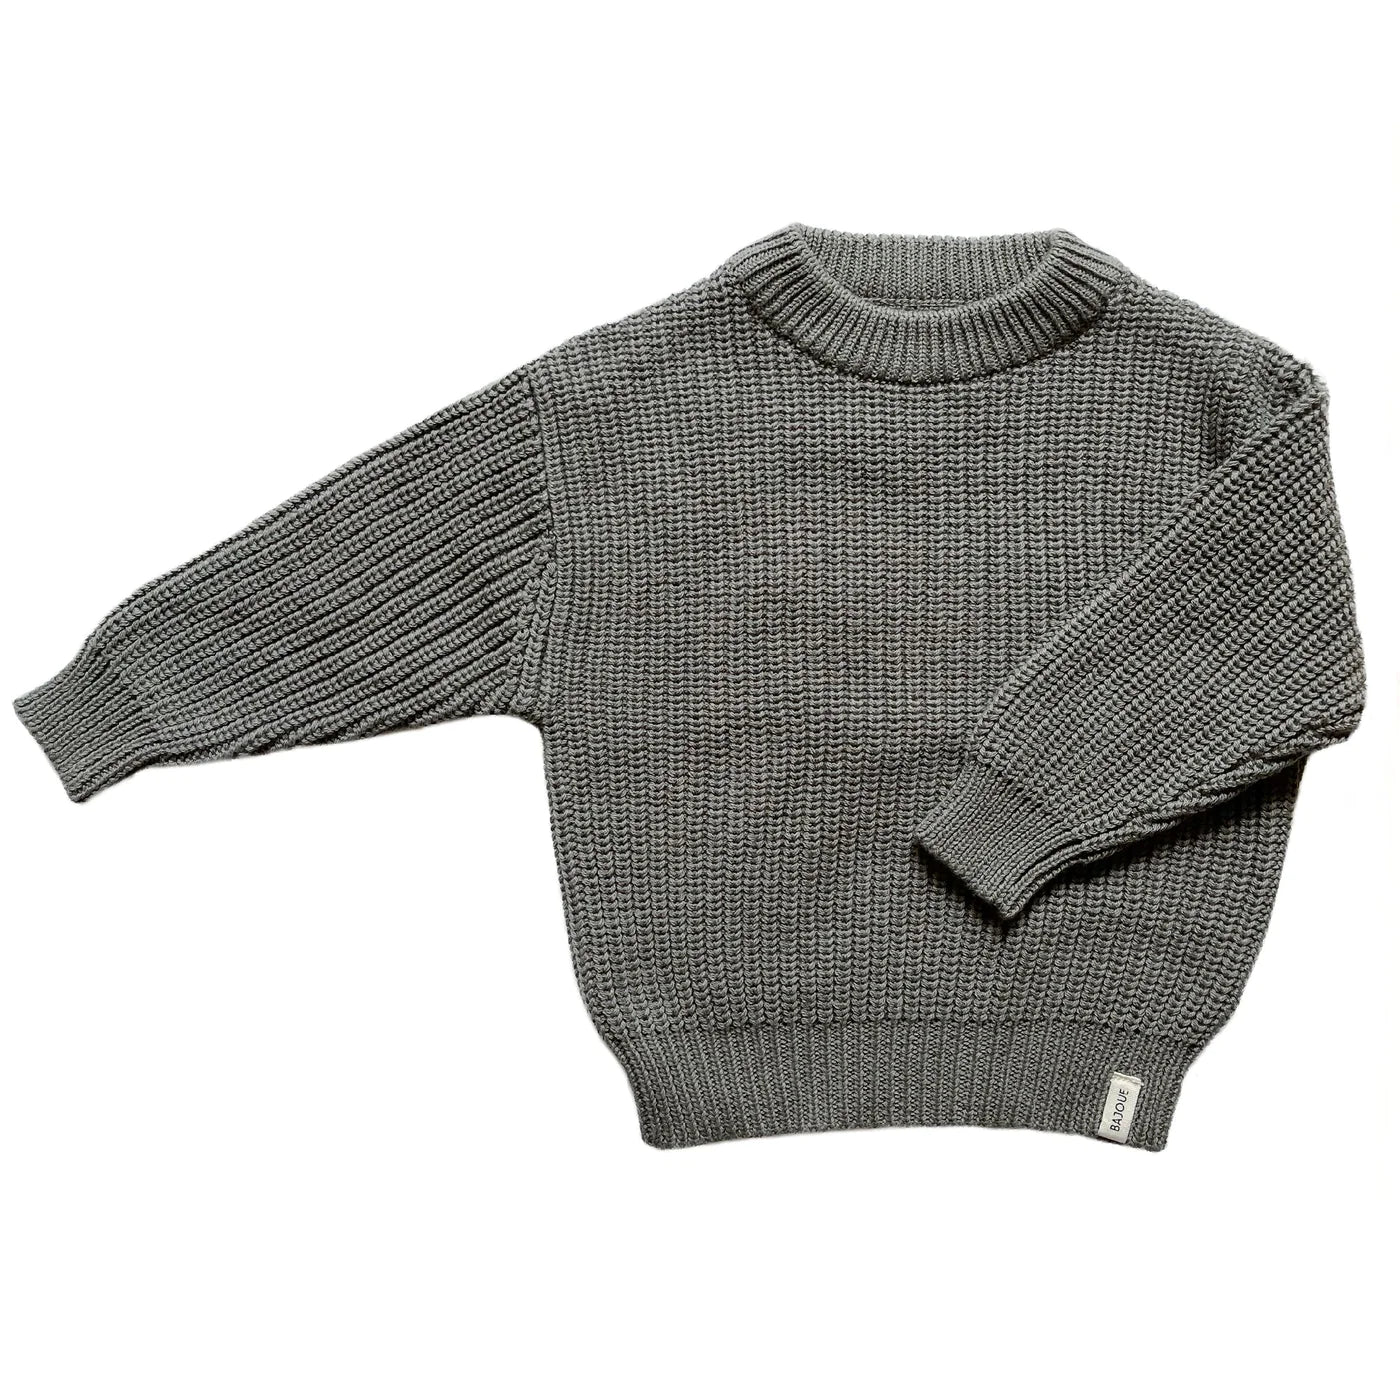 Evolutionary baby sweater and <tc>kids</tc> in Knit - Sage